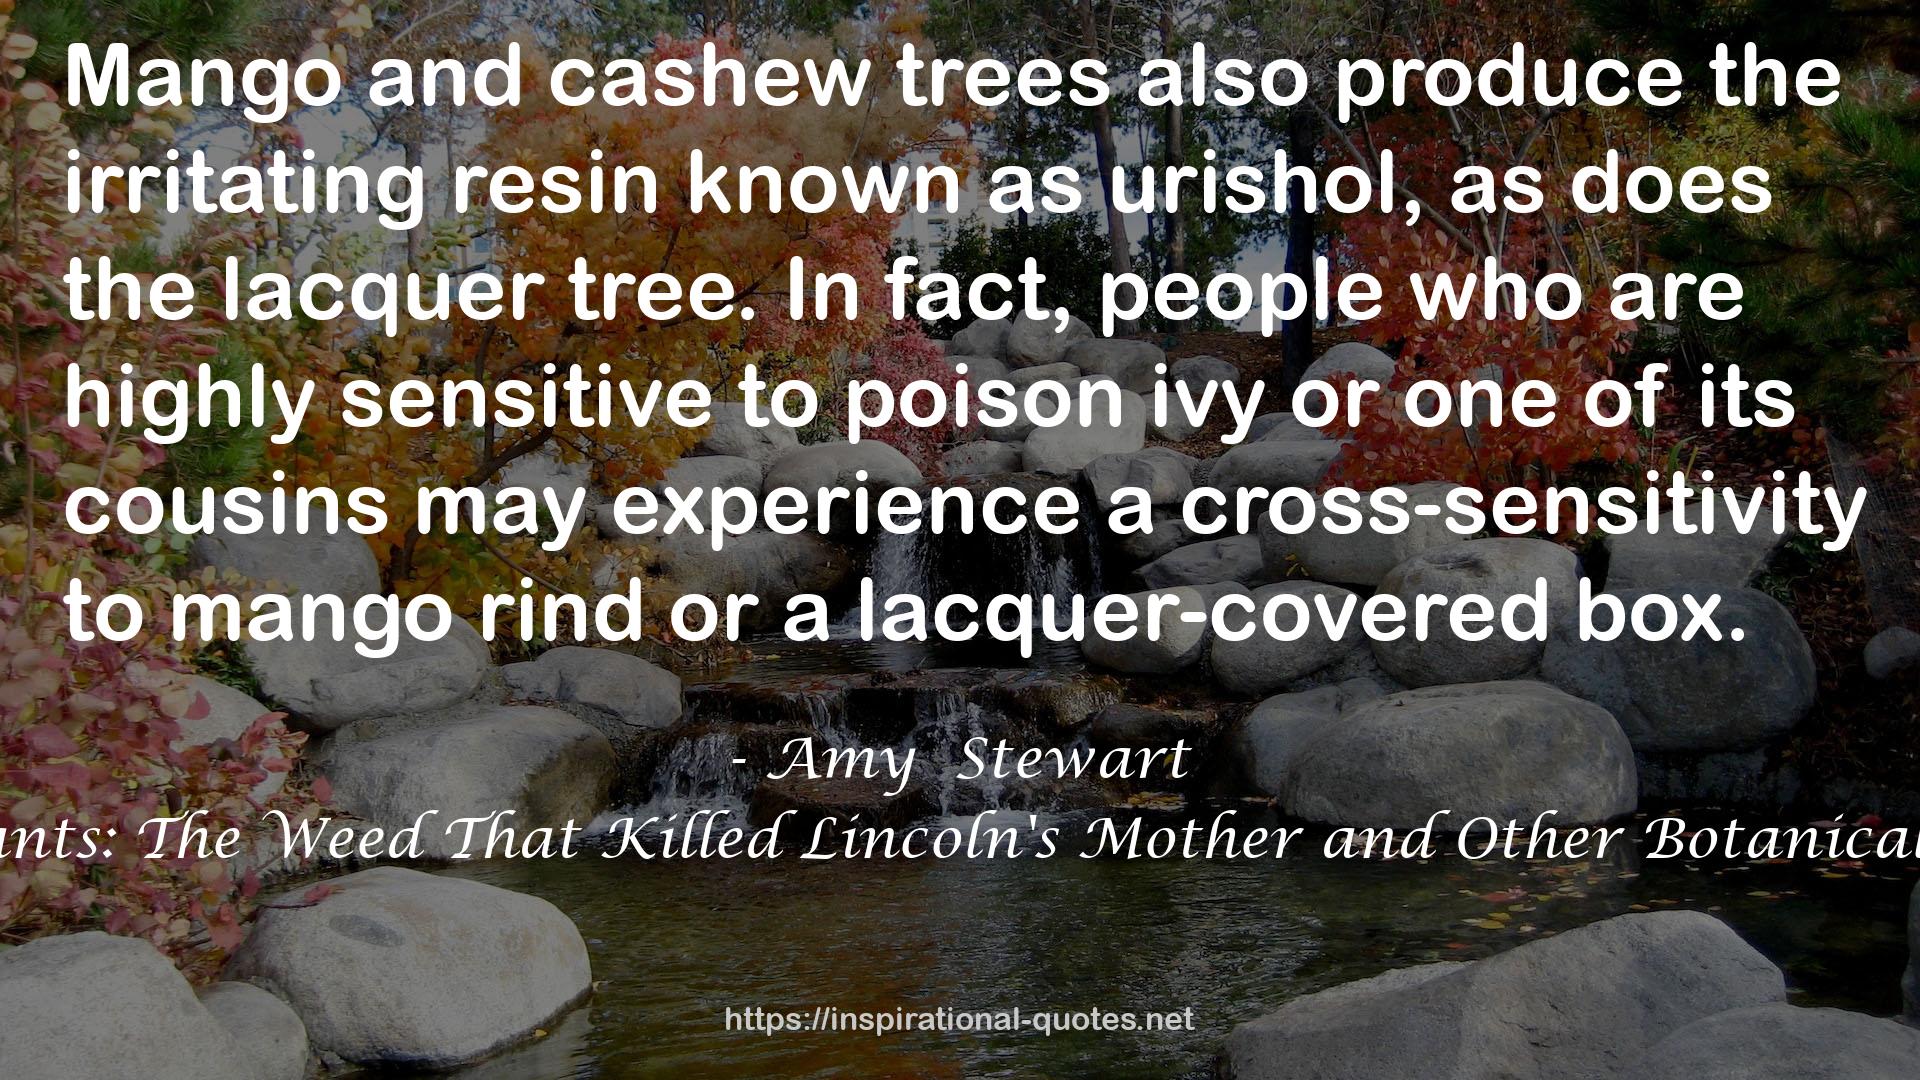 Wicked Plants: The Weed That Killed Lincoln's Mother and Other Botanical Atrocities QUOTES